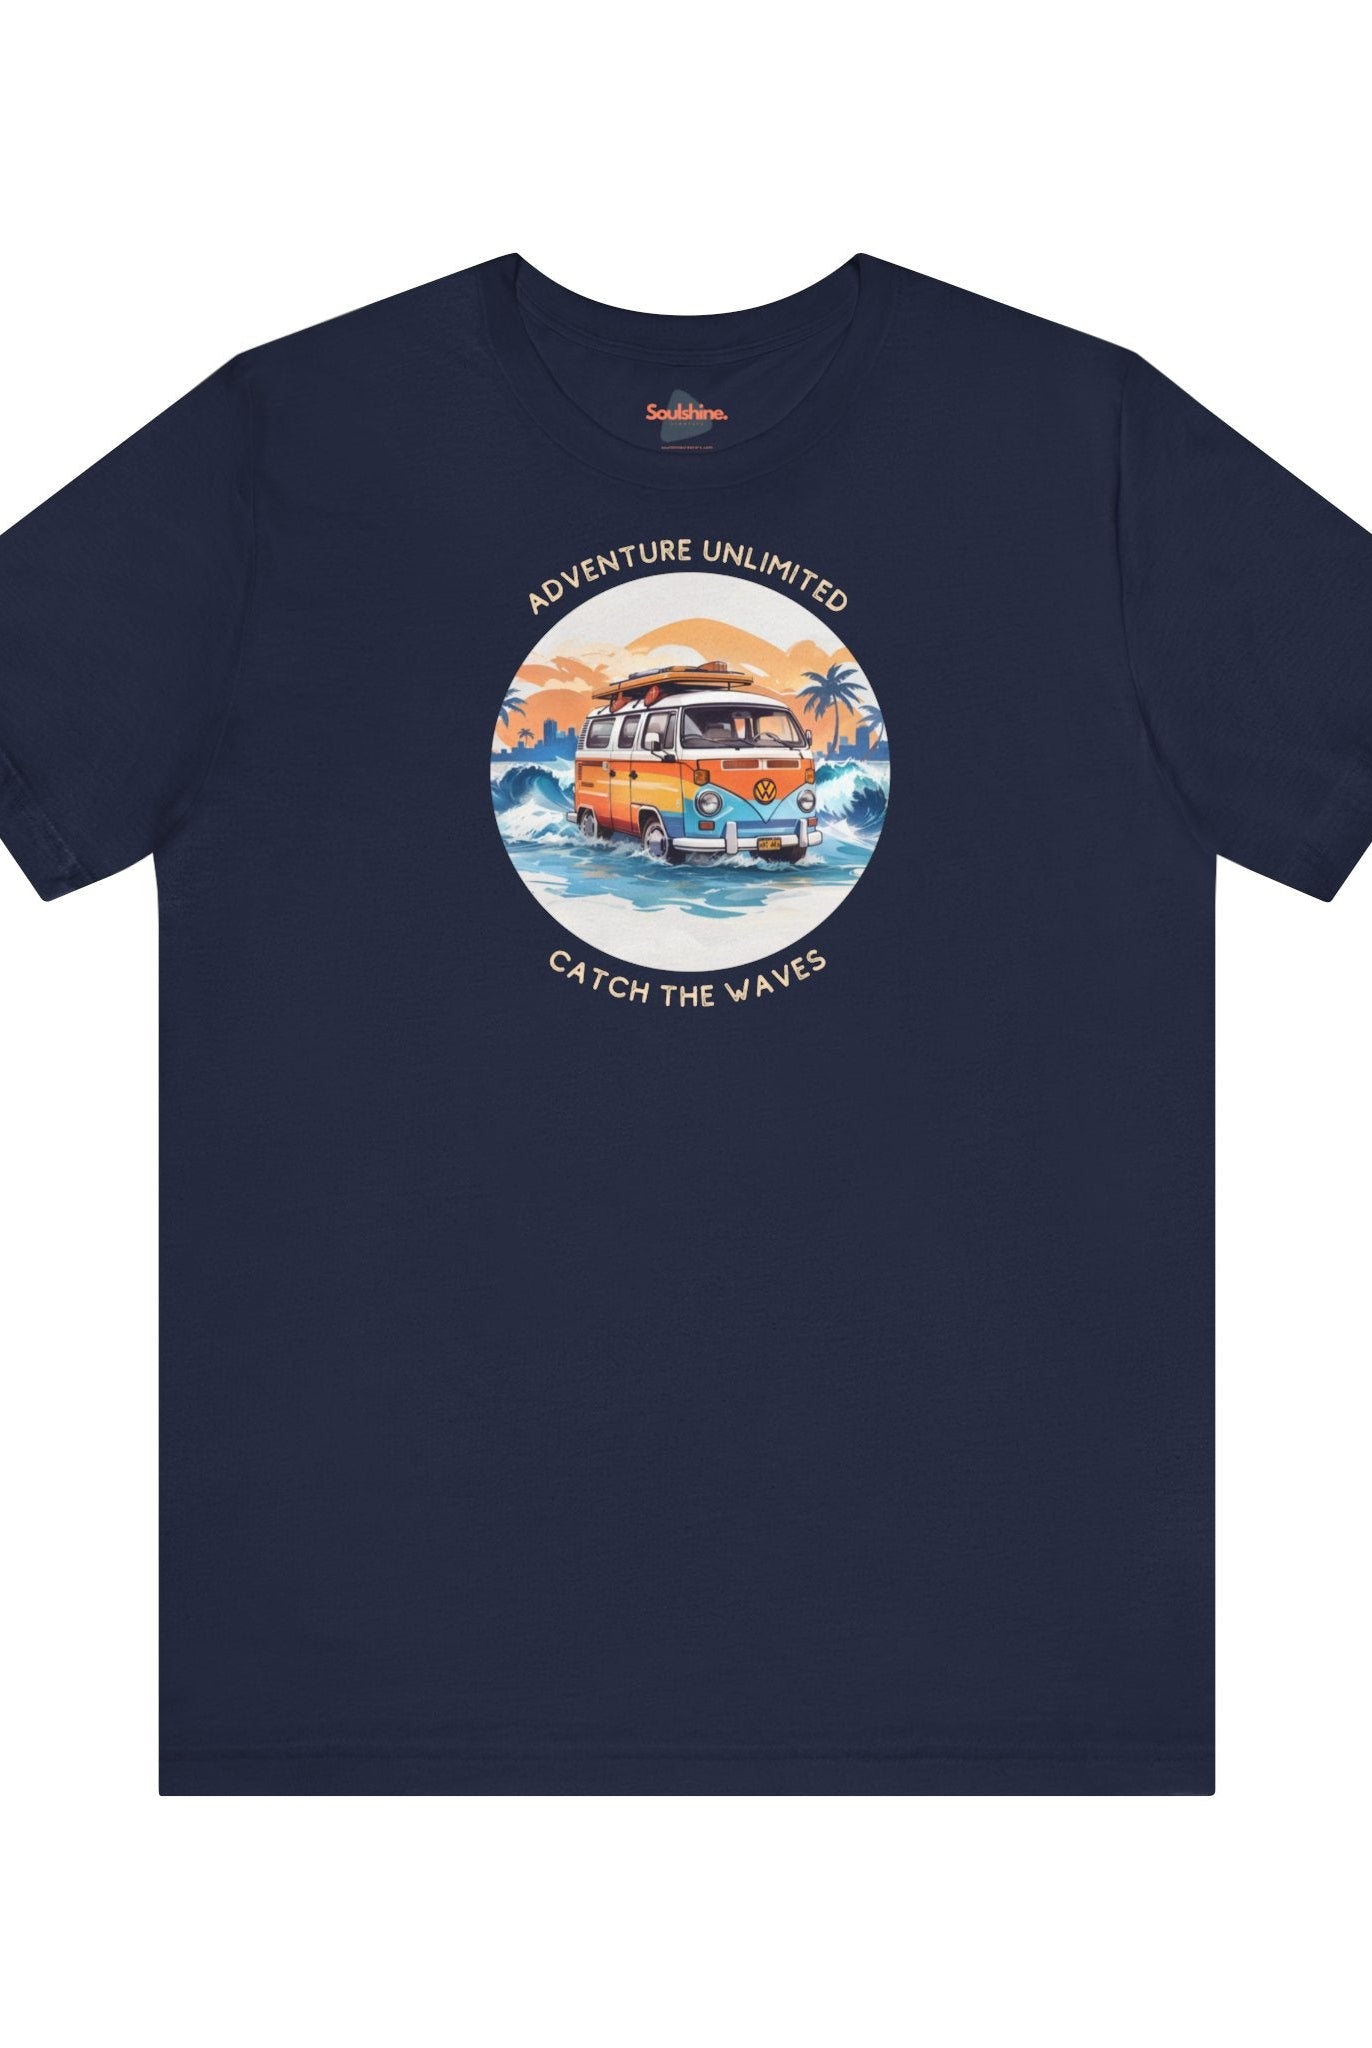 Adventure Unlimited - Surfing T-Shirt - Soulshinecreators - Navy, ’On the Water’ Printed Item